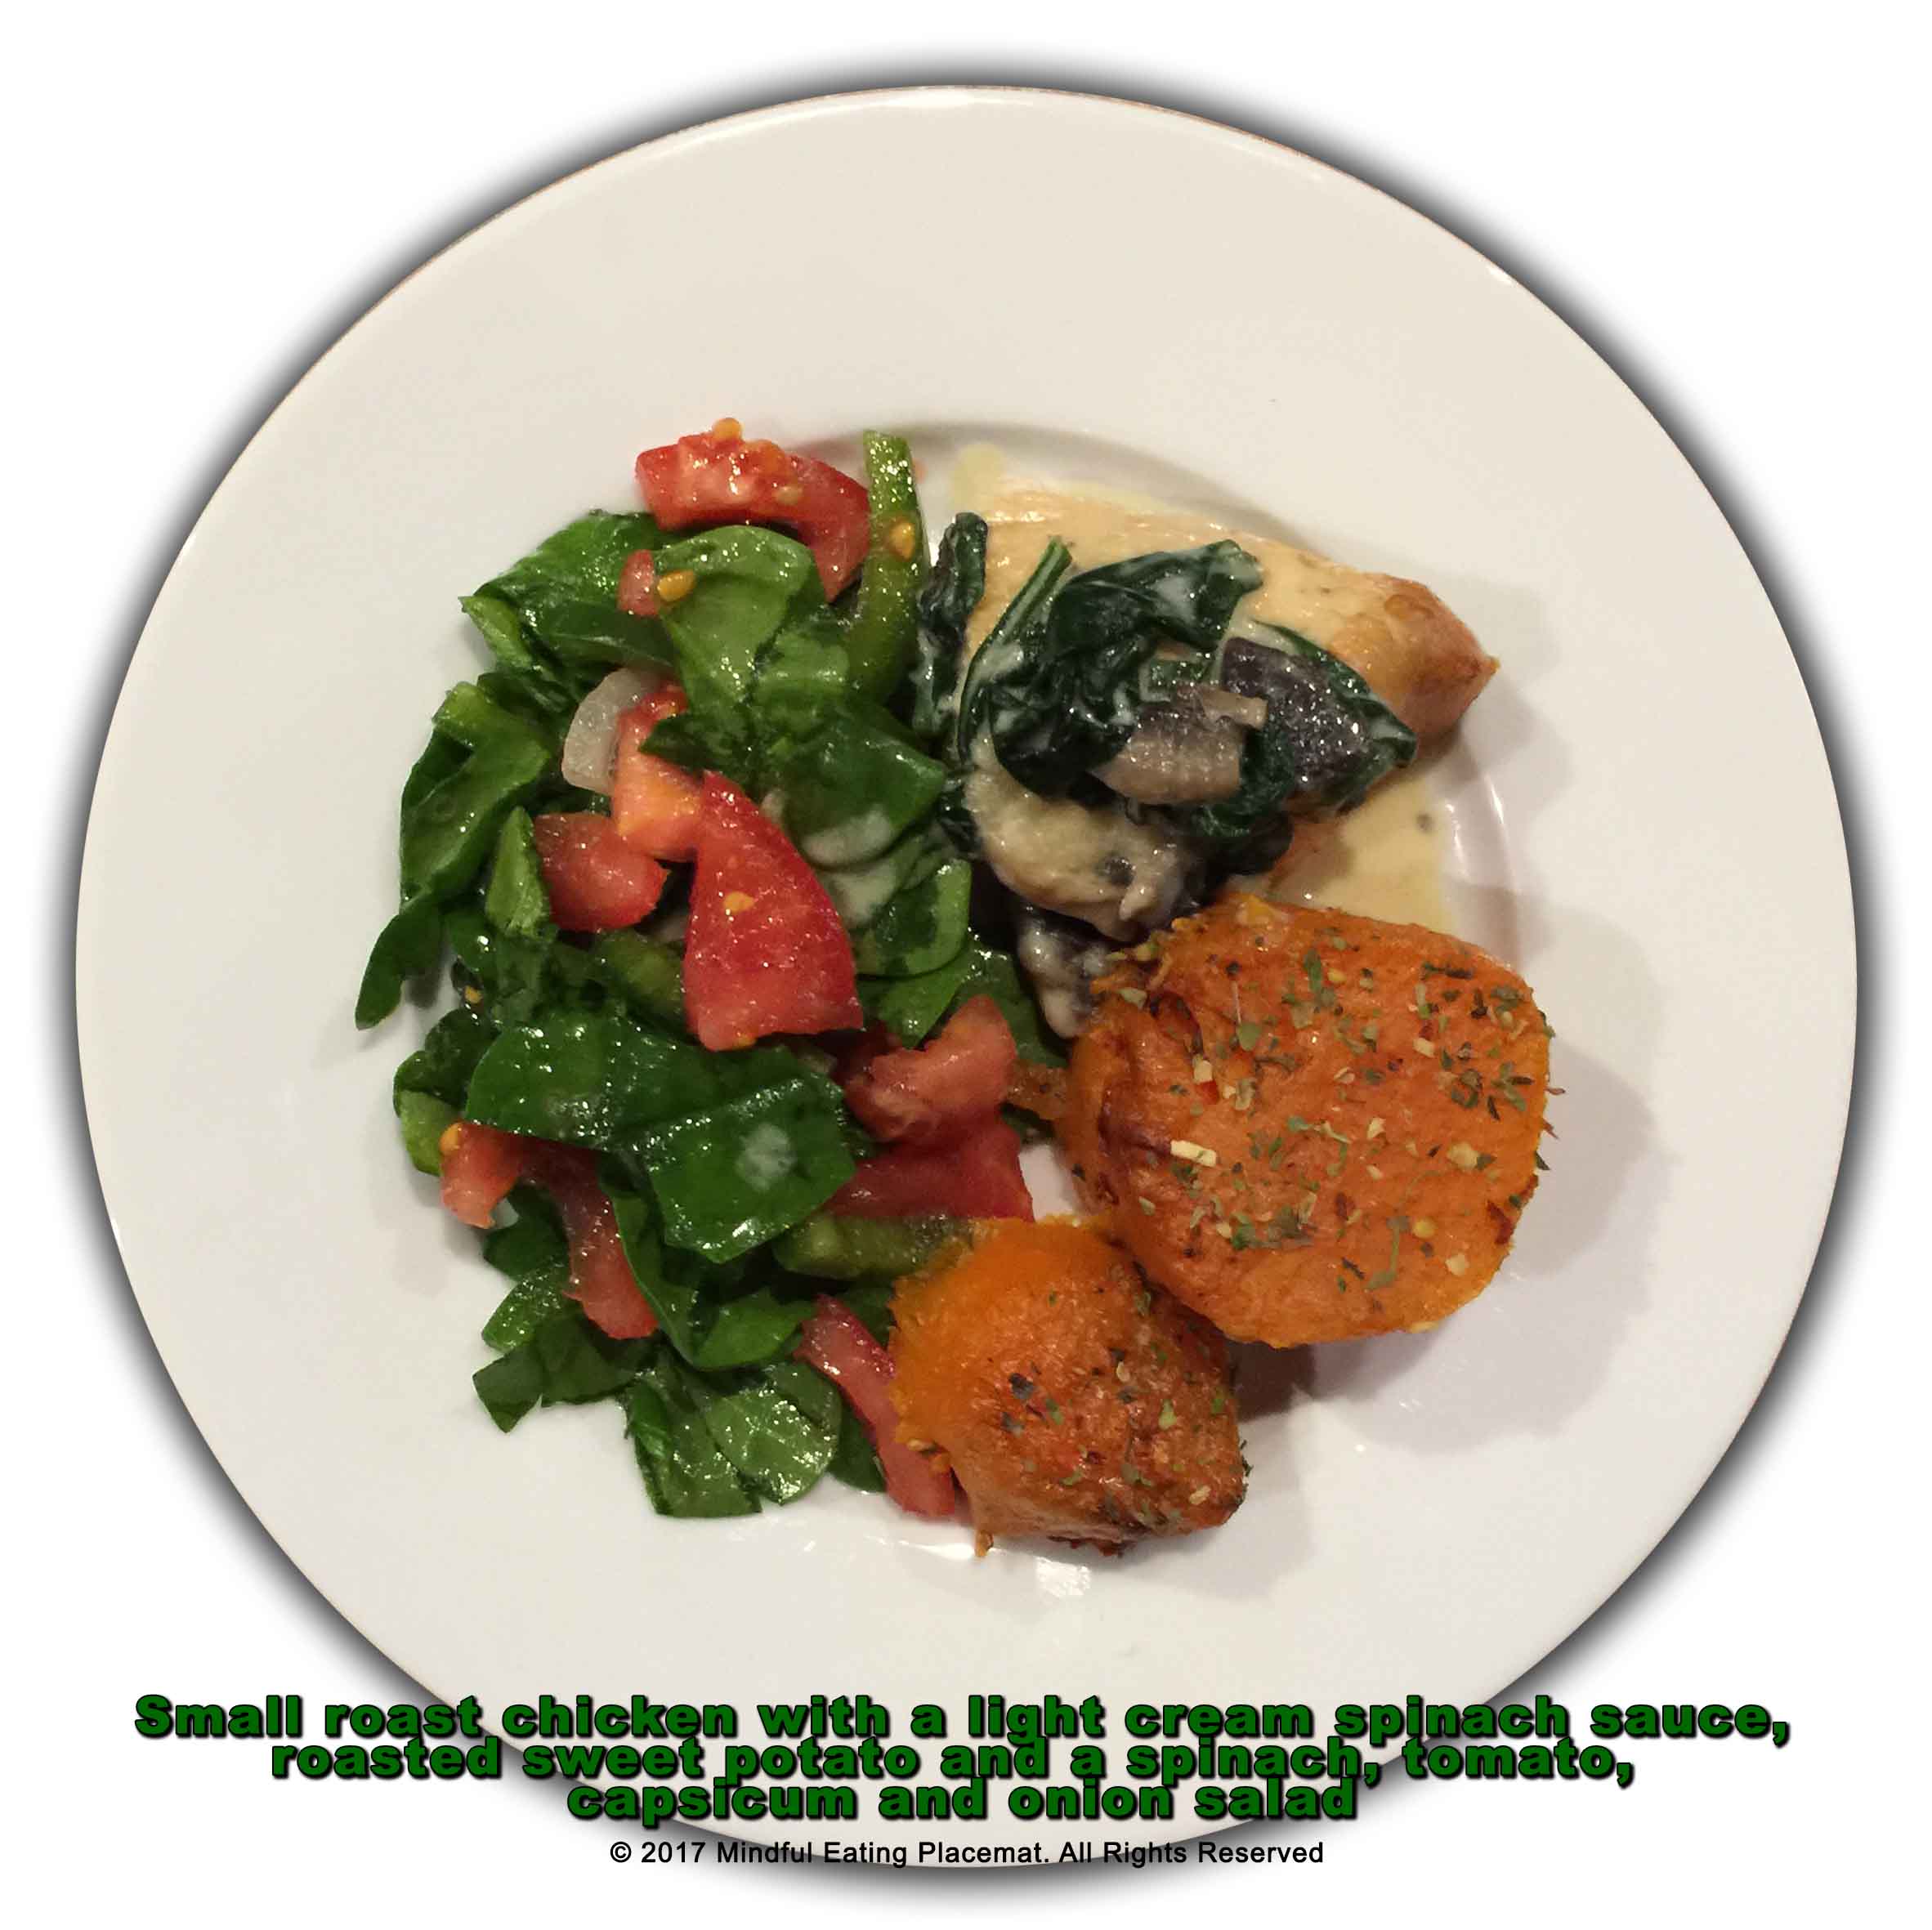 Small roast chicken with a light cream spinach sauce, roasted sweet potato and a spinach, tomato, capsicum and onion salad